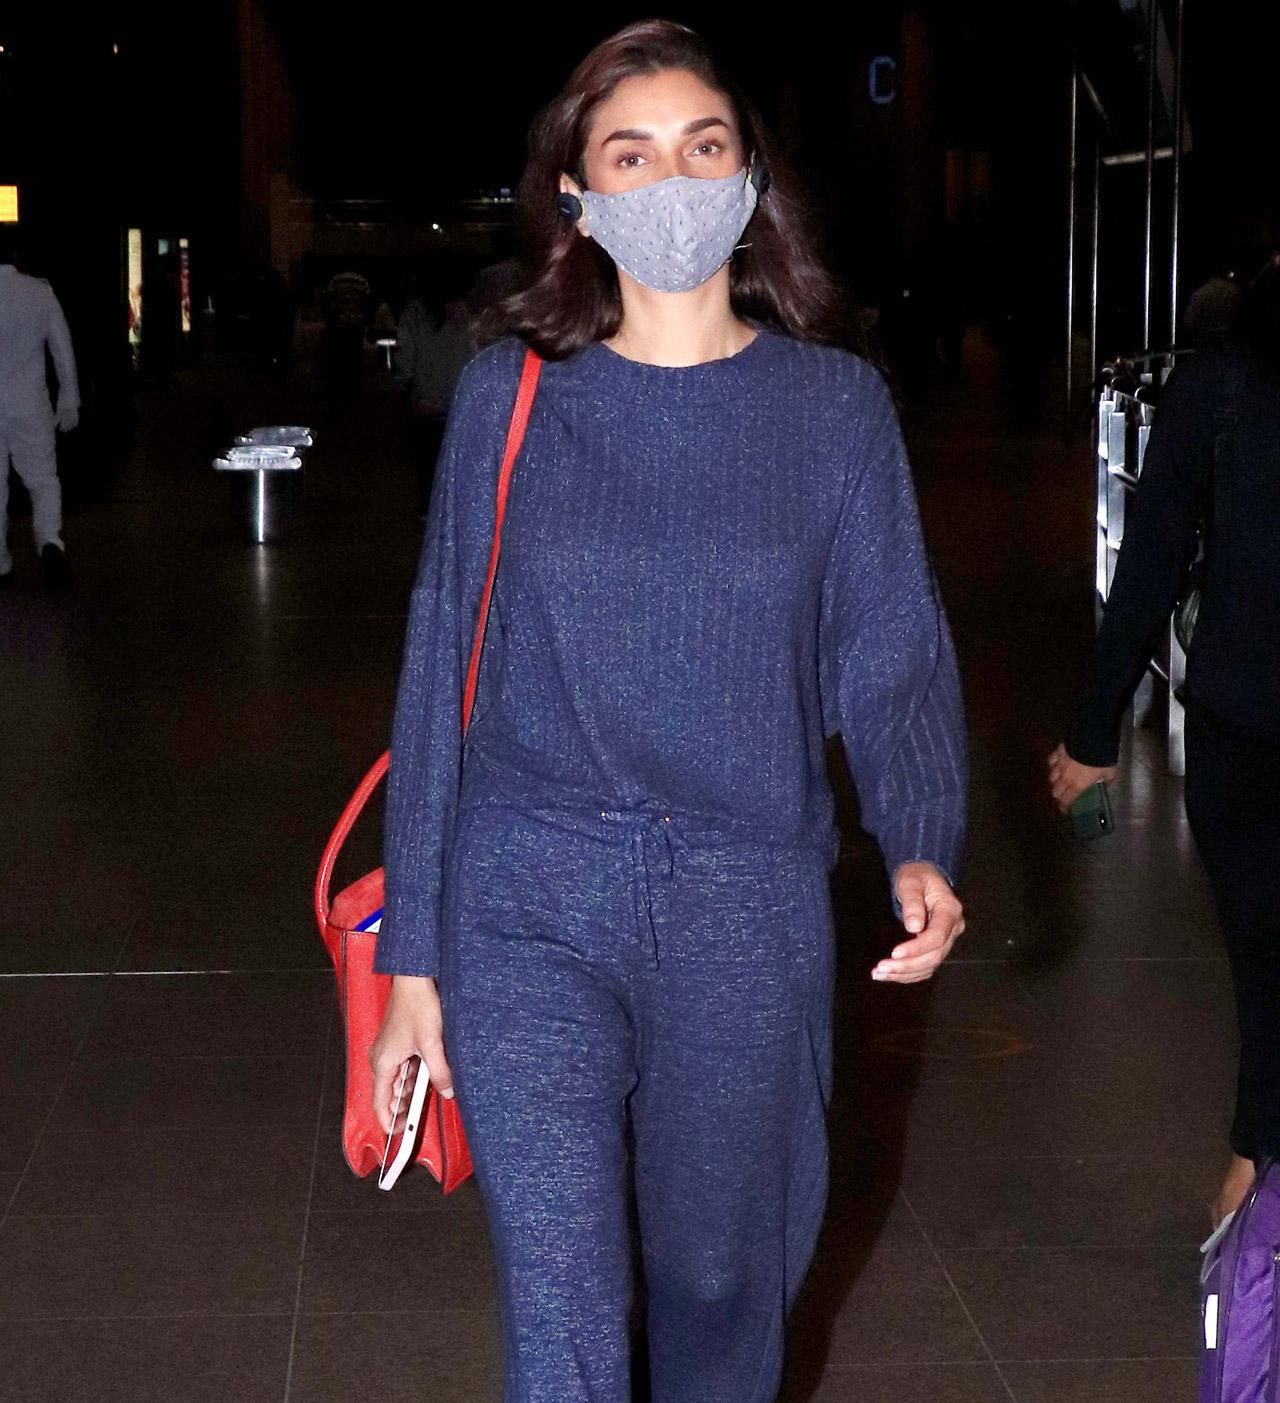 Aditi Rao Hydari dressed in all blue was clicked arriving at the Mumbai airport. The actress was last seen in Girl On The Train, which also starred Parineeti Chopra, Kirti Kulhari, Avinash Tiwary.